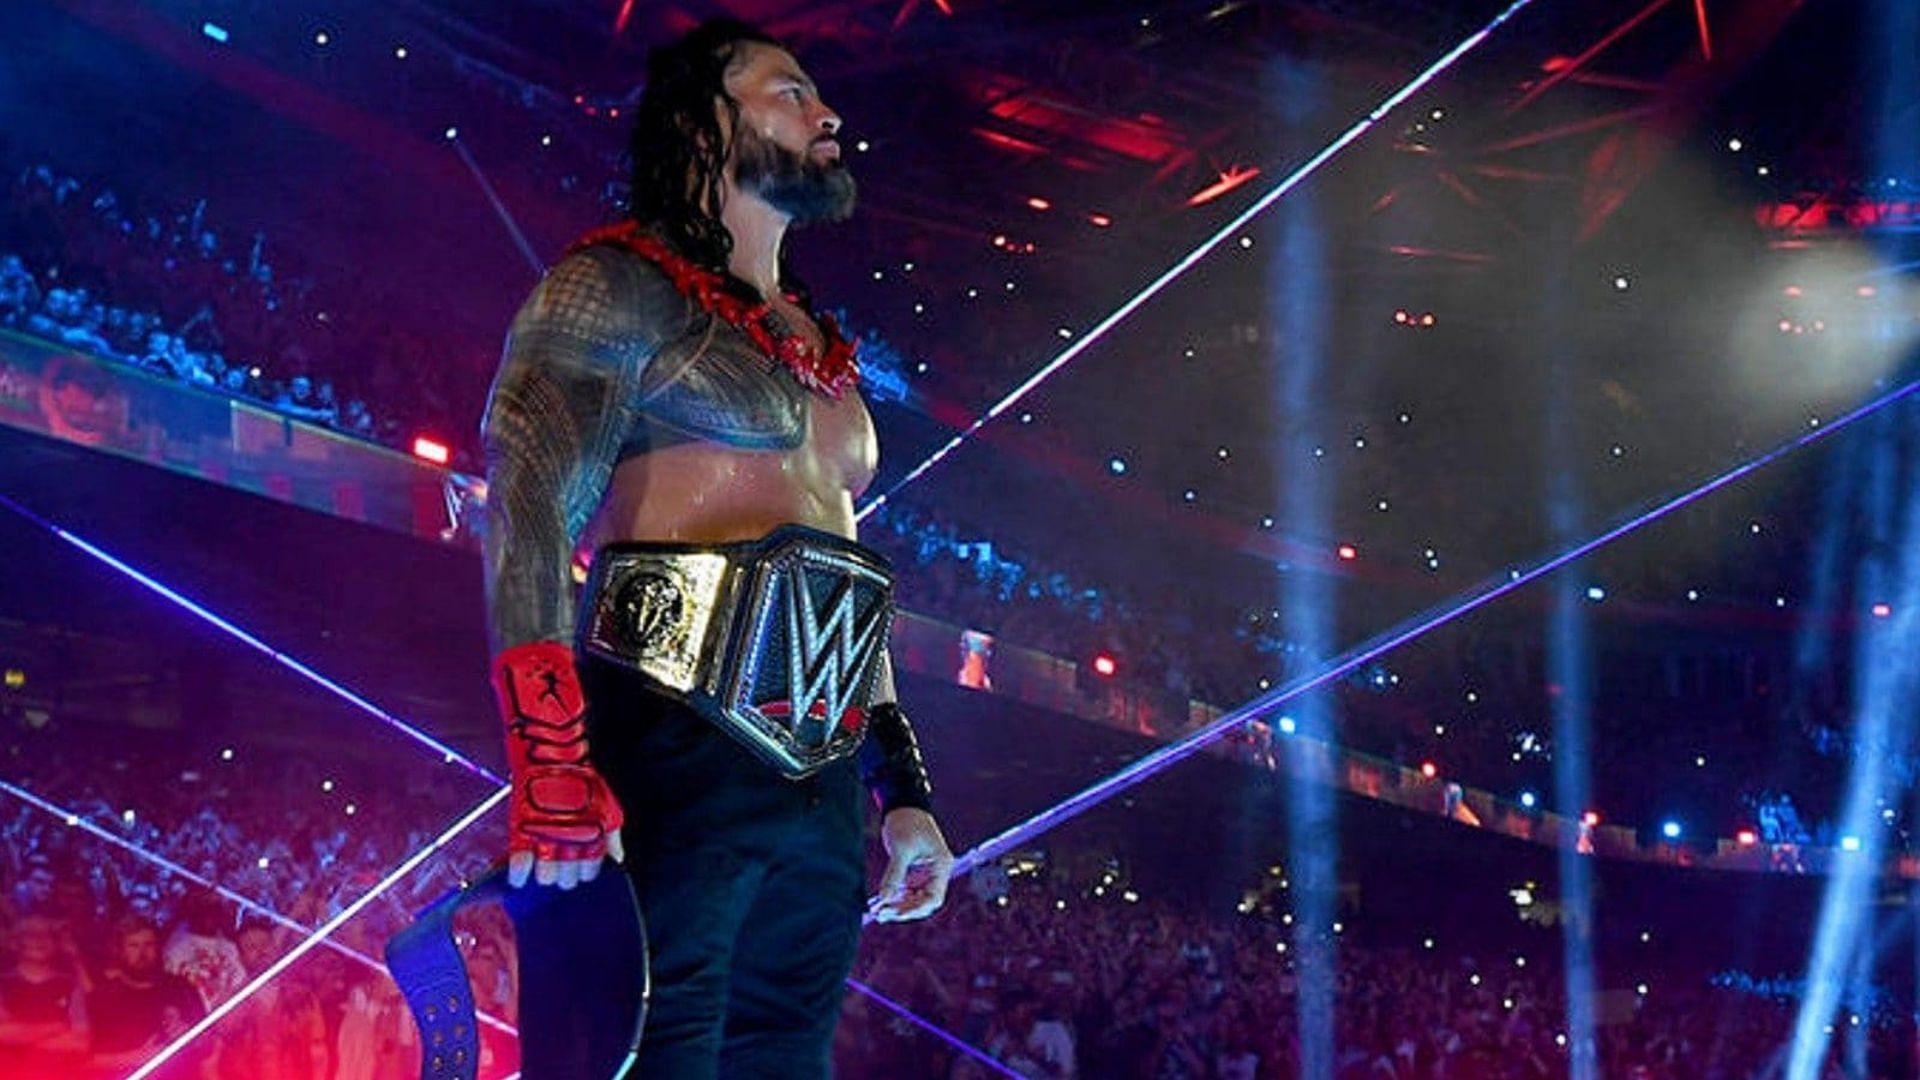 Roman Reigns retained his titles at Clash at the Castle